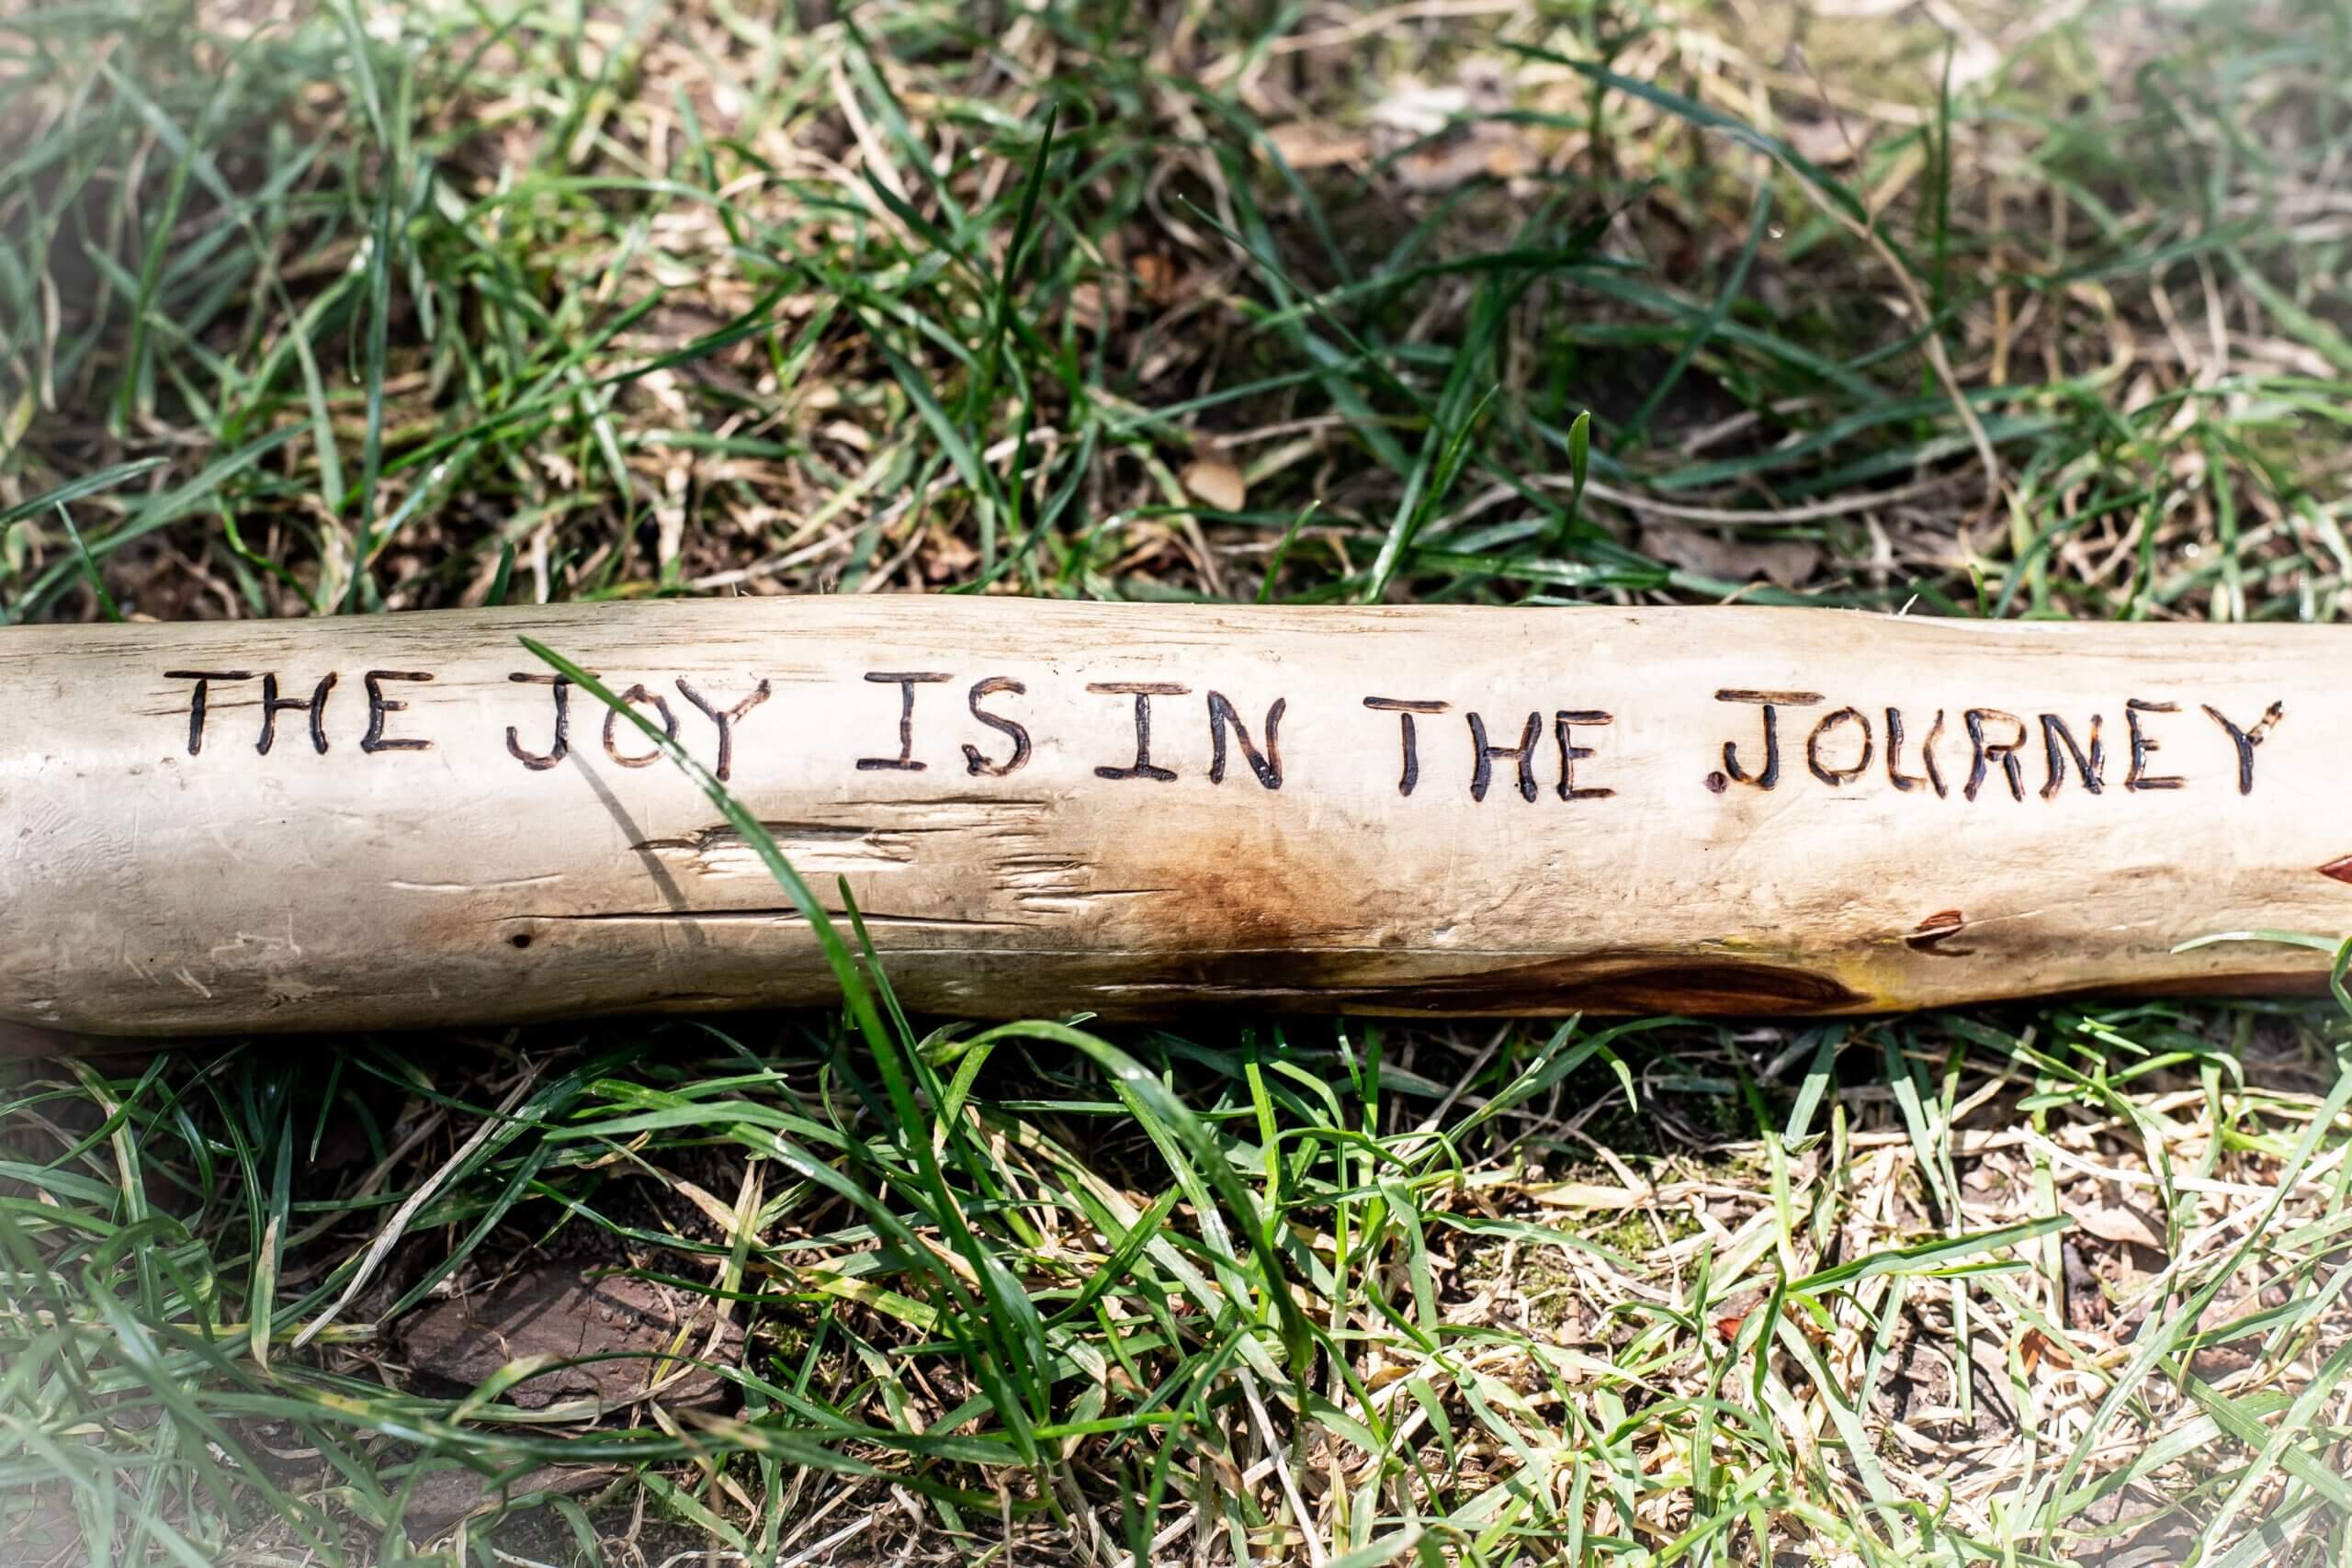 A piece of wood sitting on green grass that reads: THE JOY IS IN THE JOURNEY